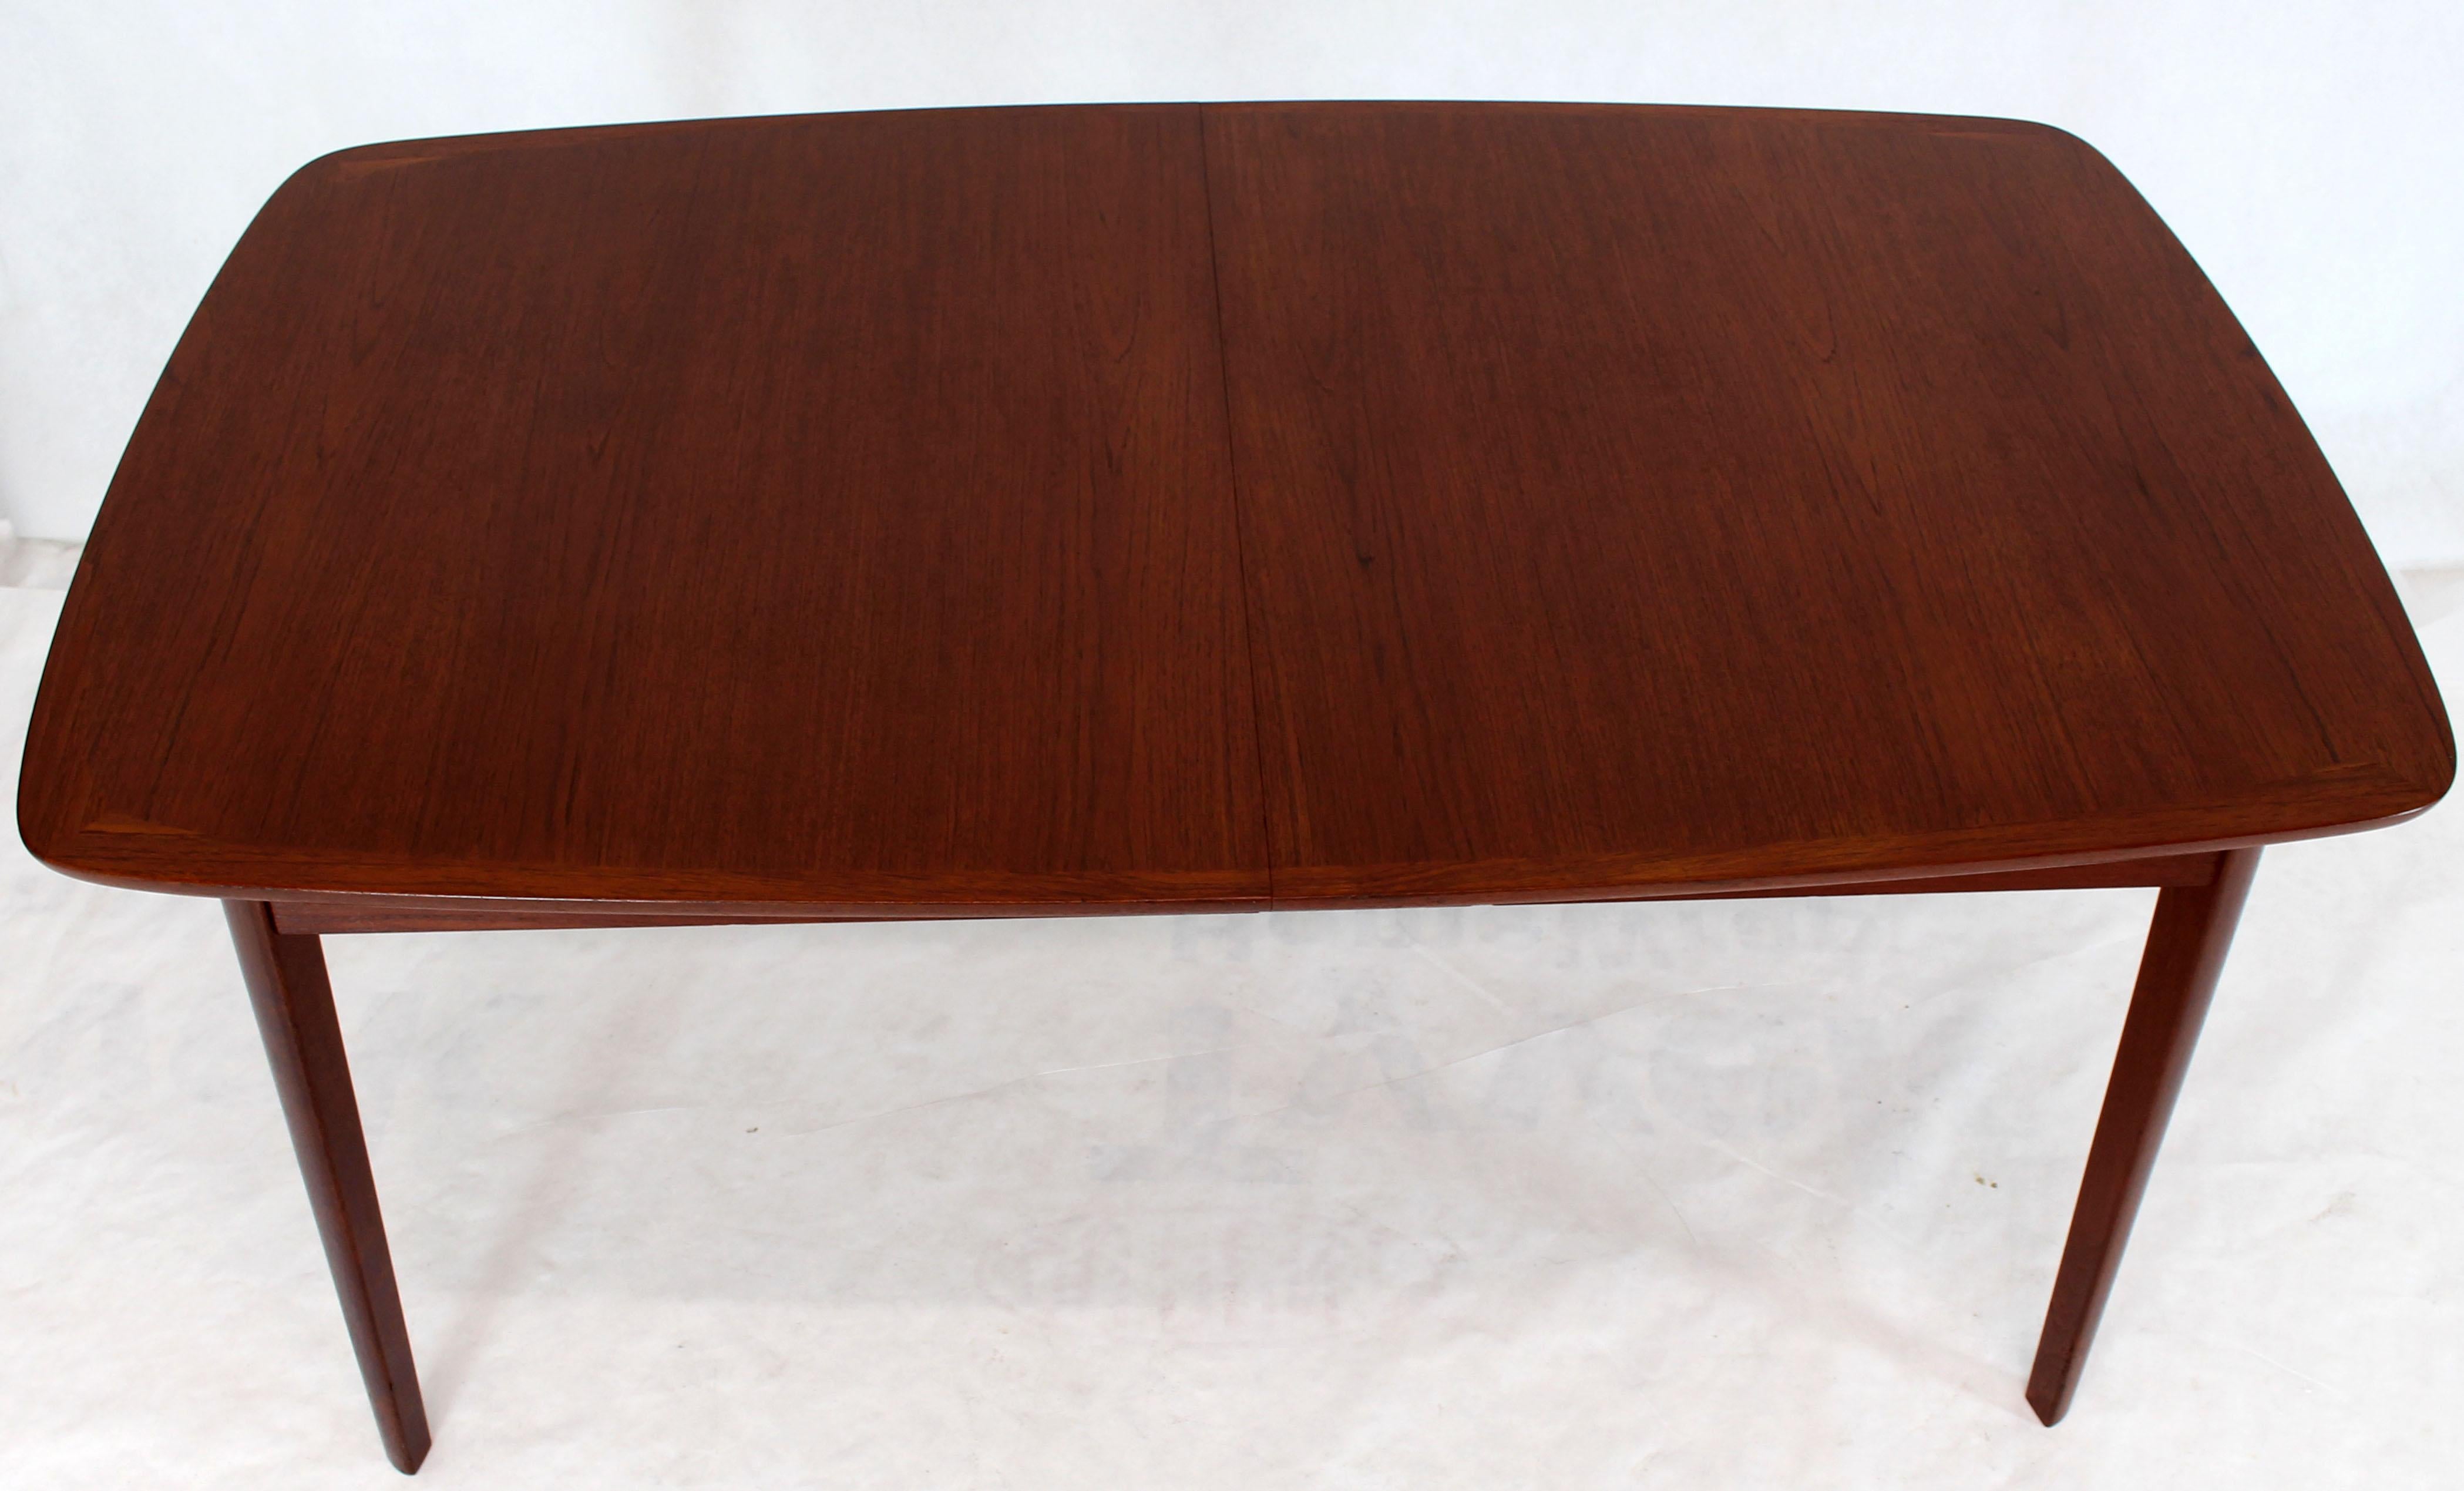 Danish Teak Mid-Century Modern Dining Banquet Table Self Storing Folding Leafs For Sale 7